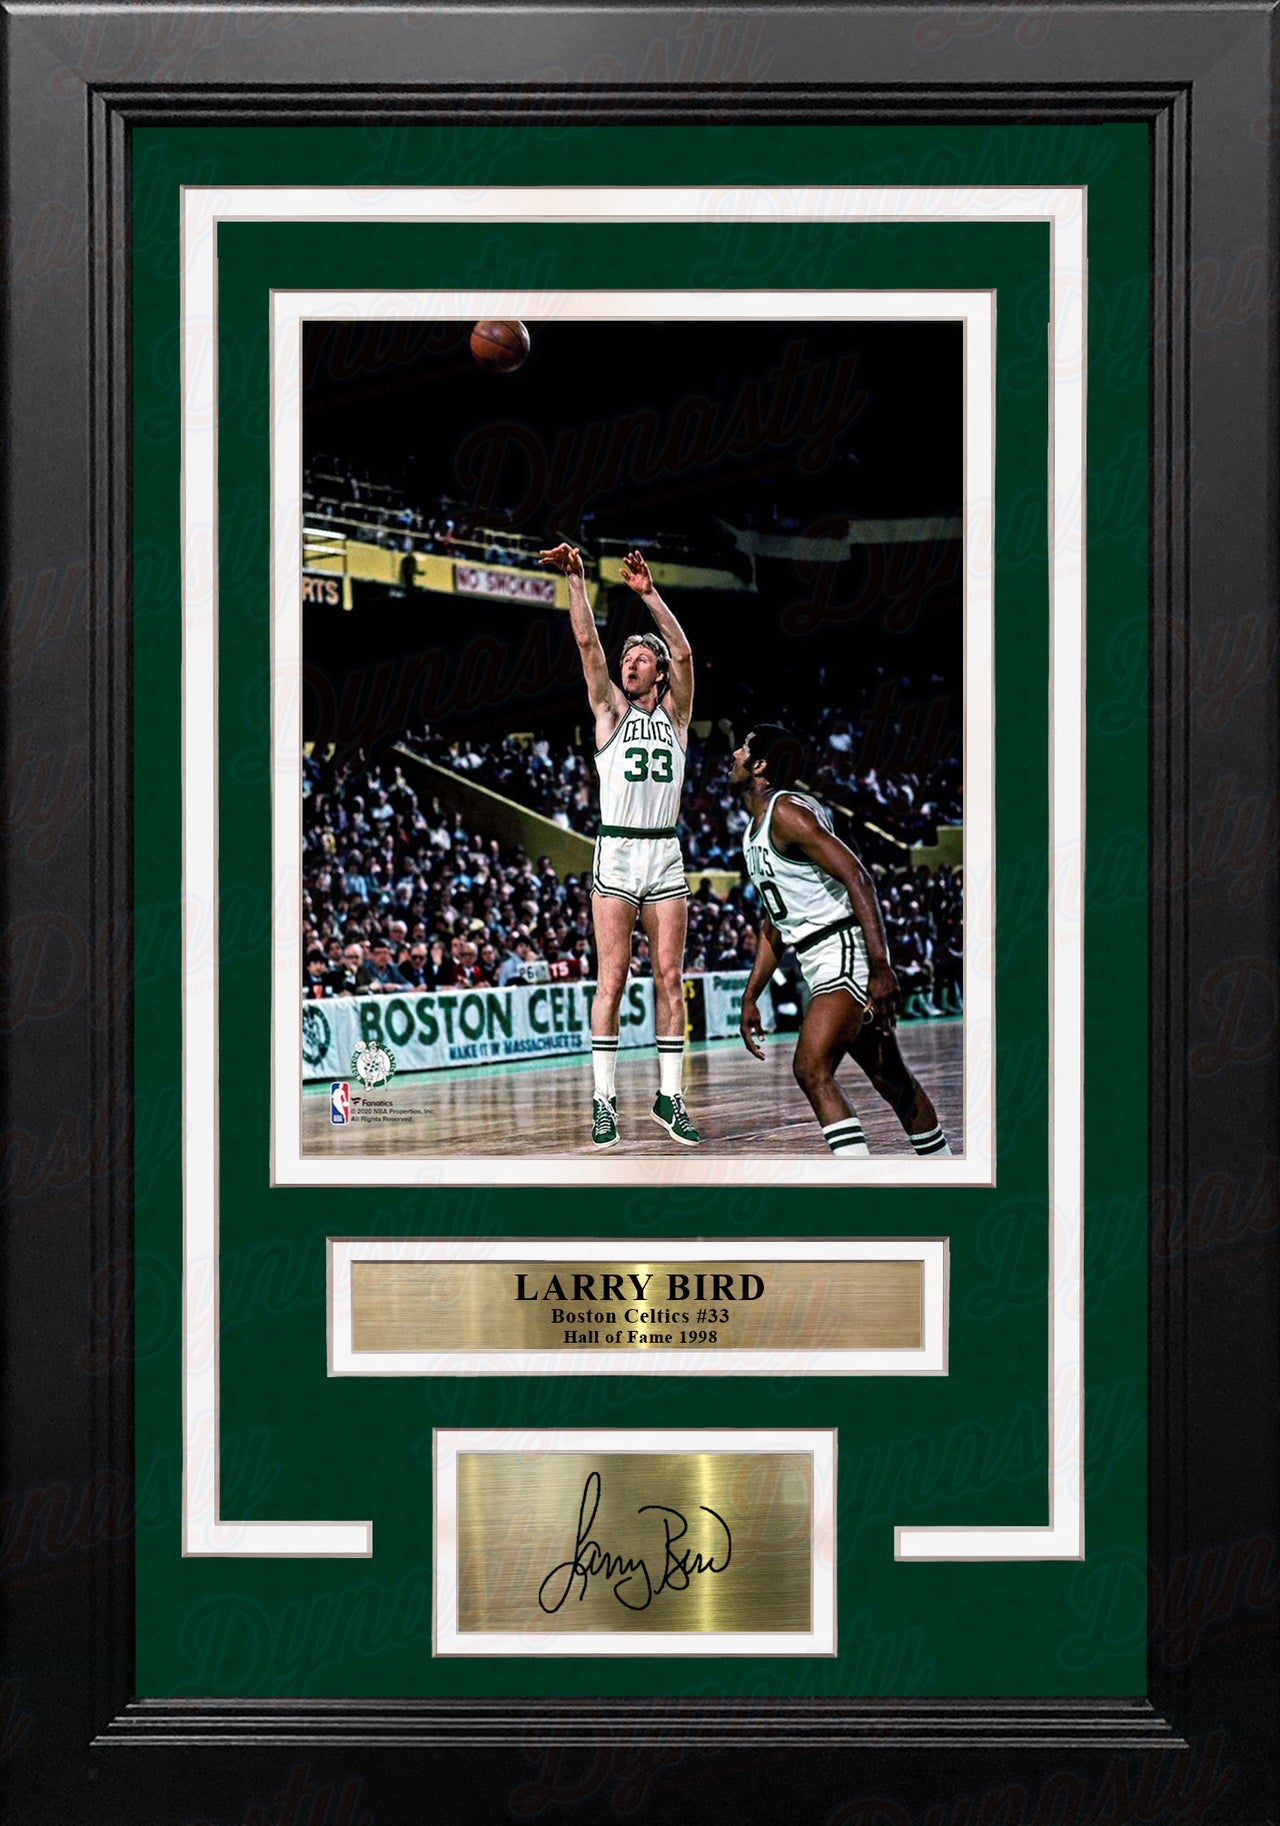 Larry Bird in Action Boston Celtics 8" x 10" Framed Basketball Photo with Engraved Autograph - Dynasty Sports & Framing 